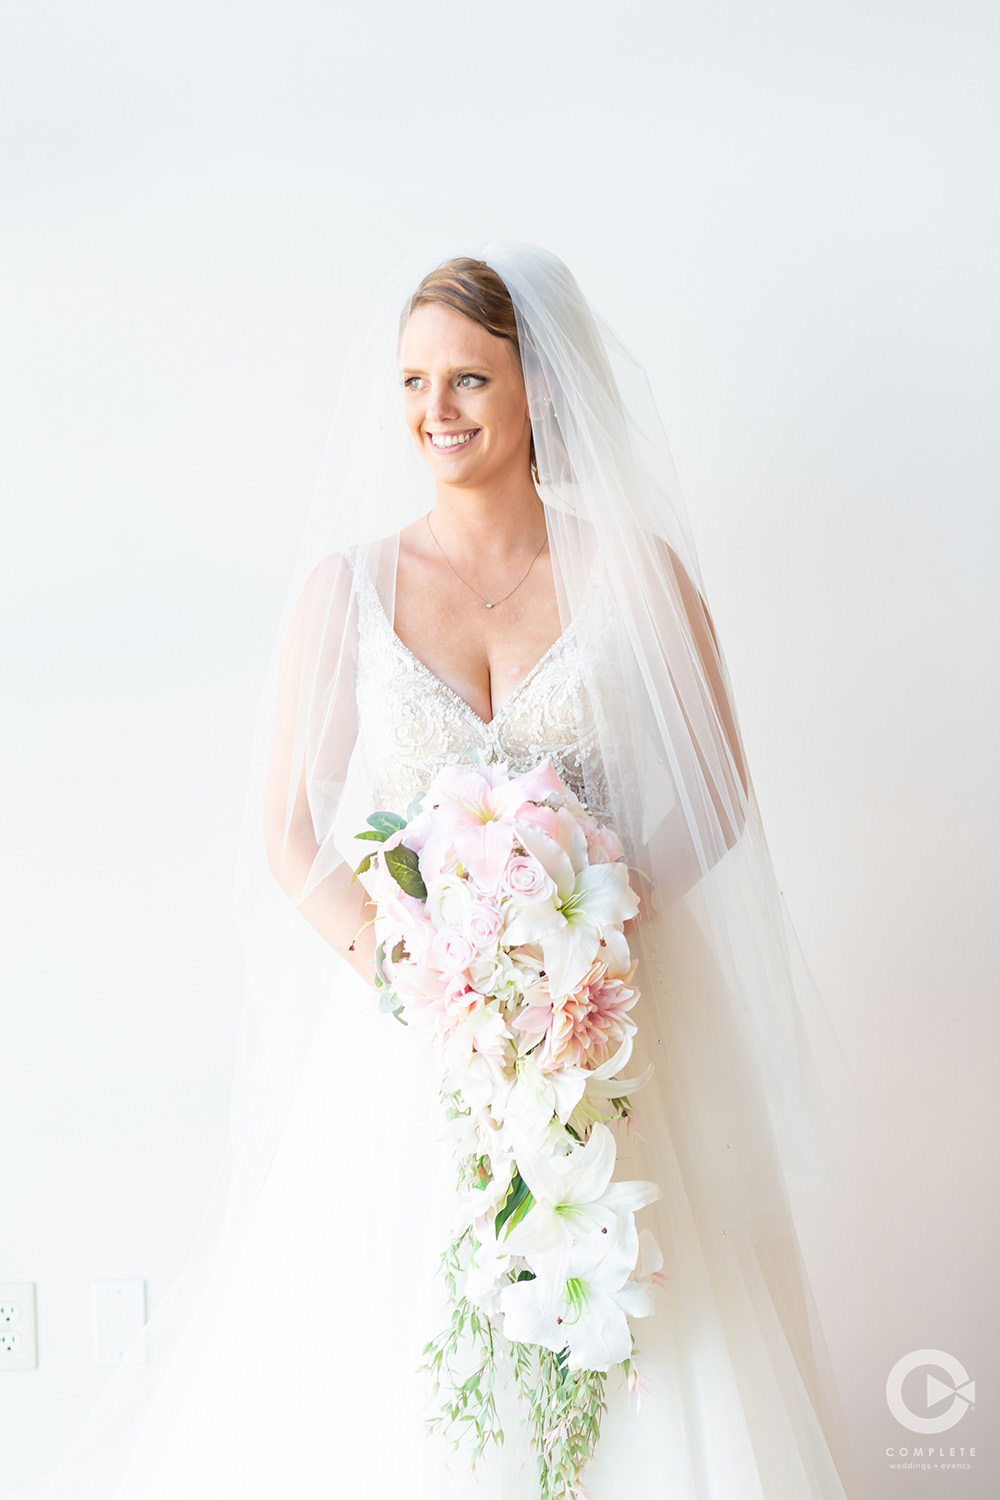 pale pink wedding colors in bridal bouquet